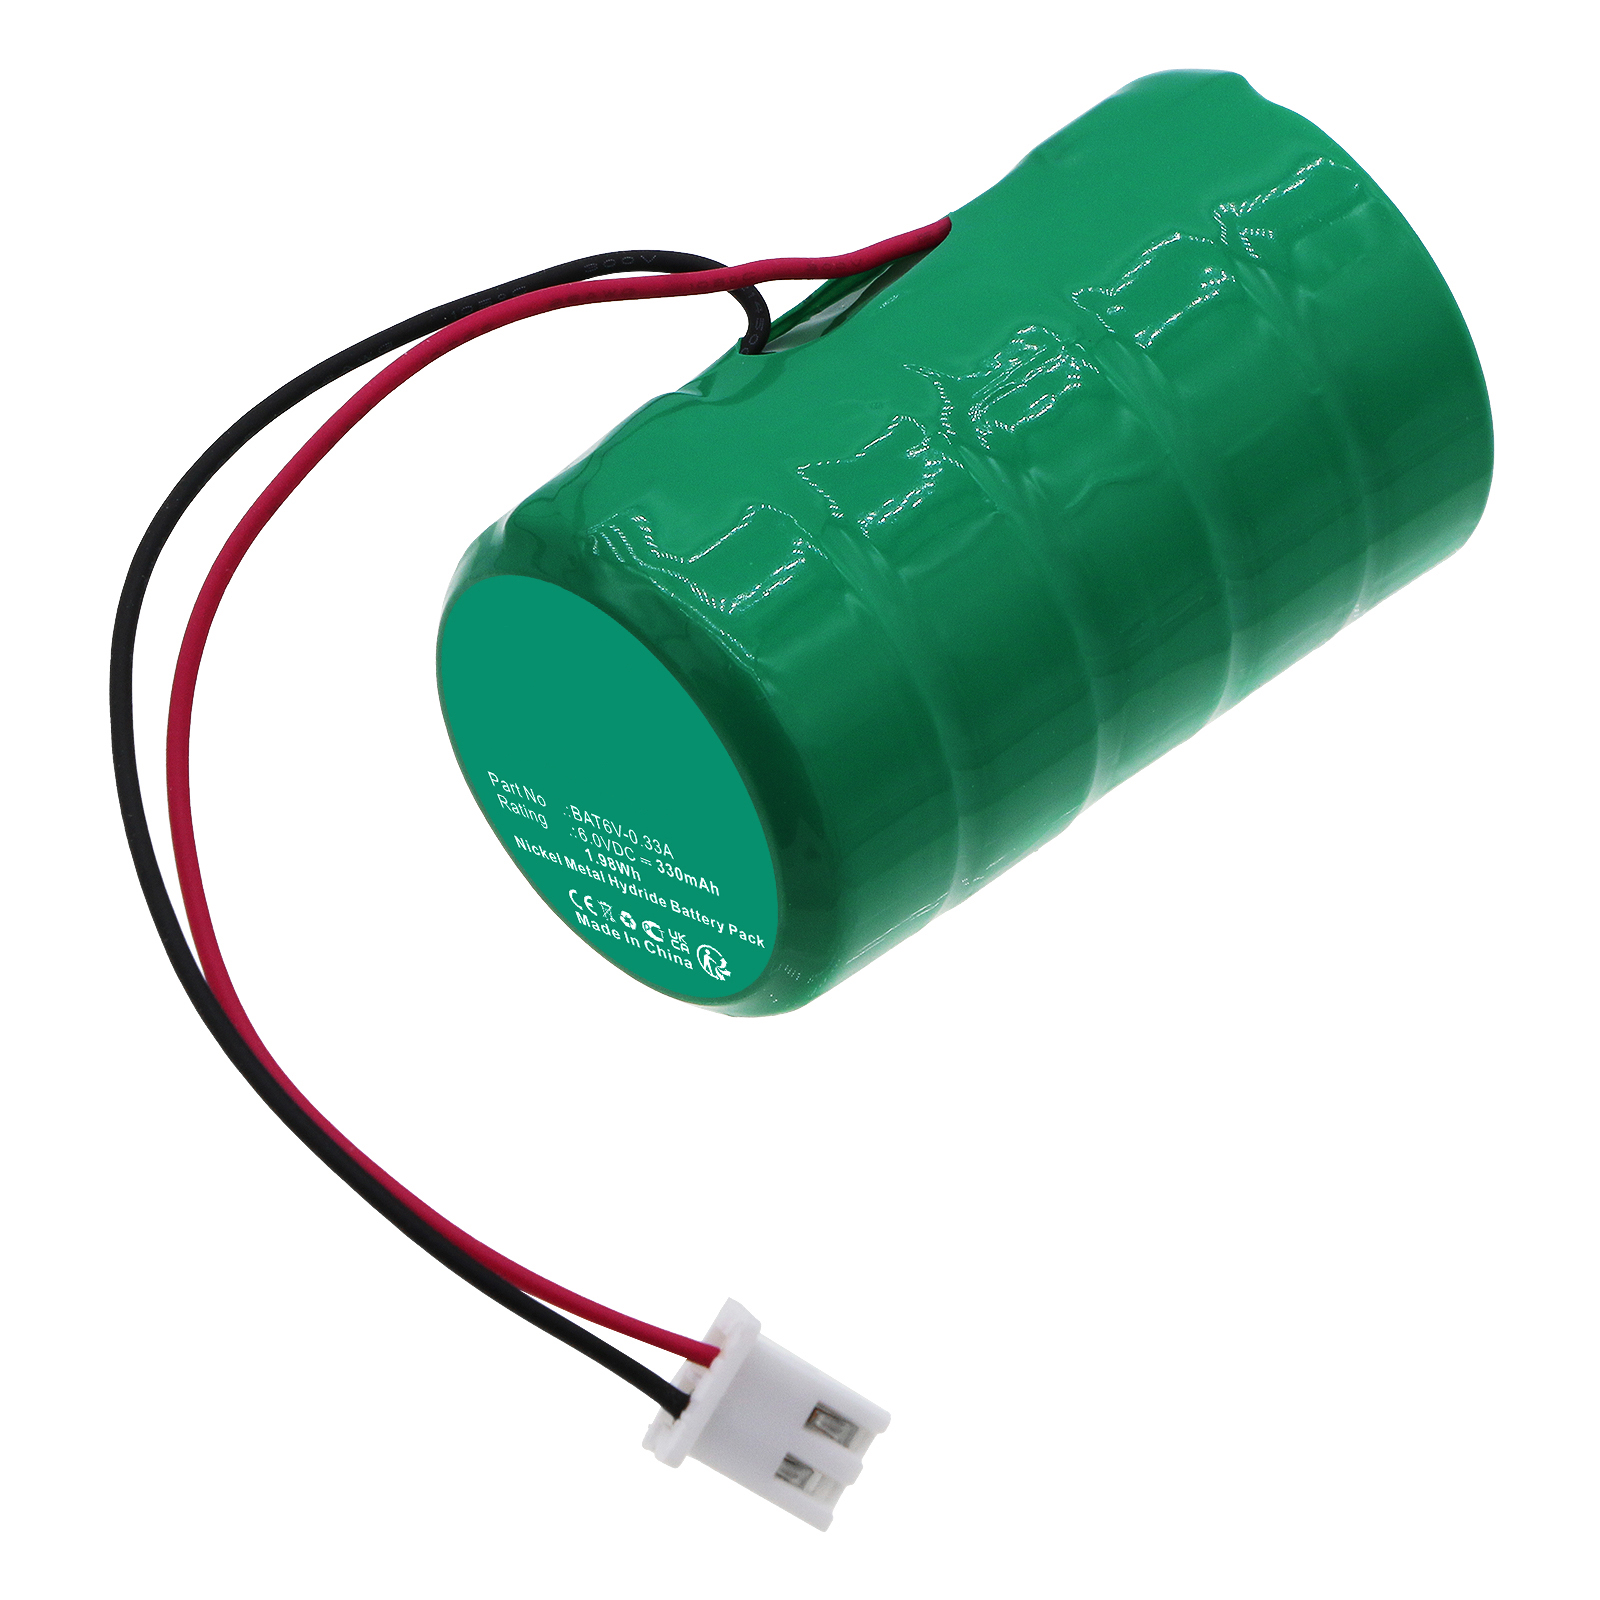 Synergy Digital Alarm System Battery, Compatible with CQR BAT6V-0.33A Alarm System Battery (Ni-MH, 6V, 330mAh)